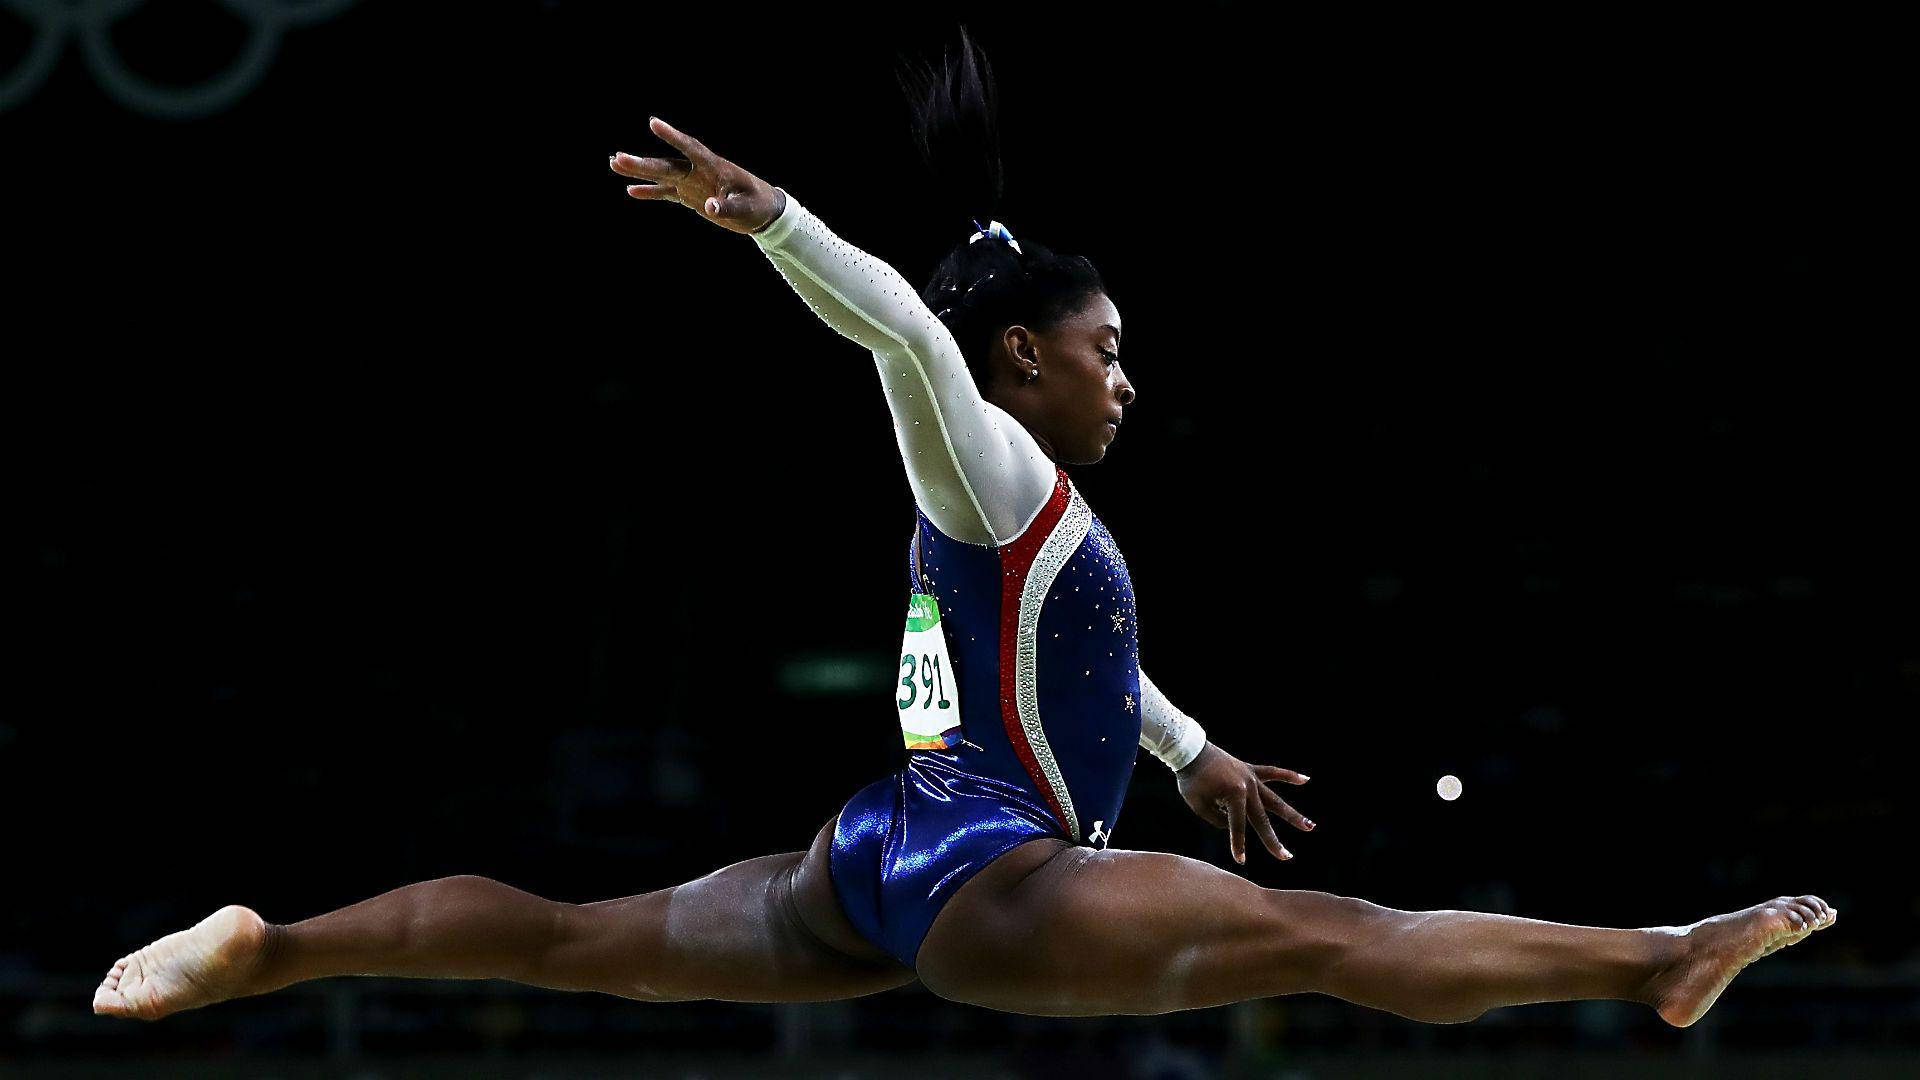 4-time Olympic Gold Medalist Simone Biles Performs On The Balance Beam